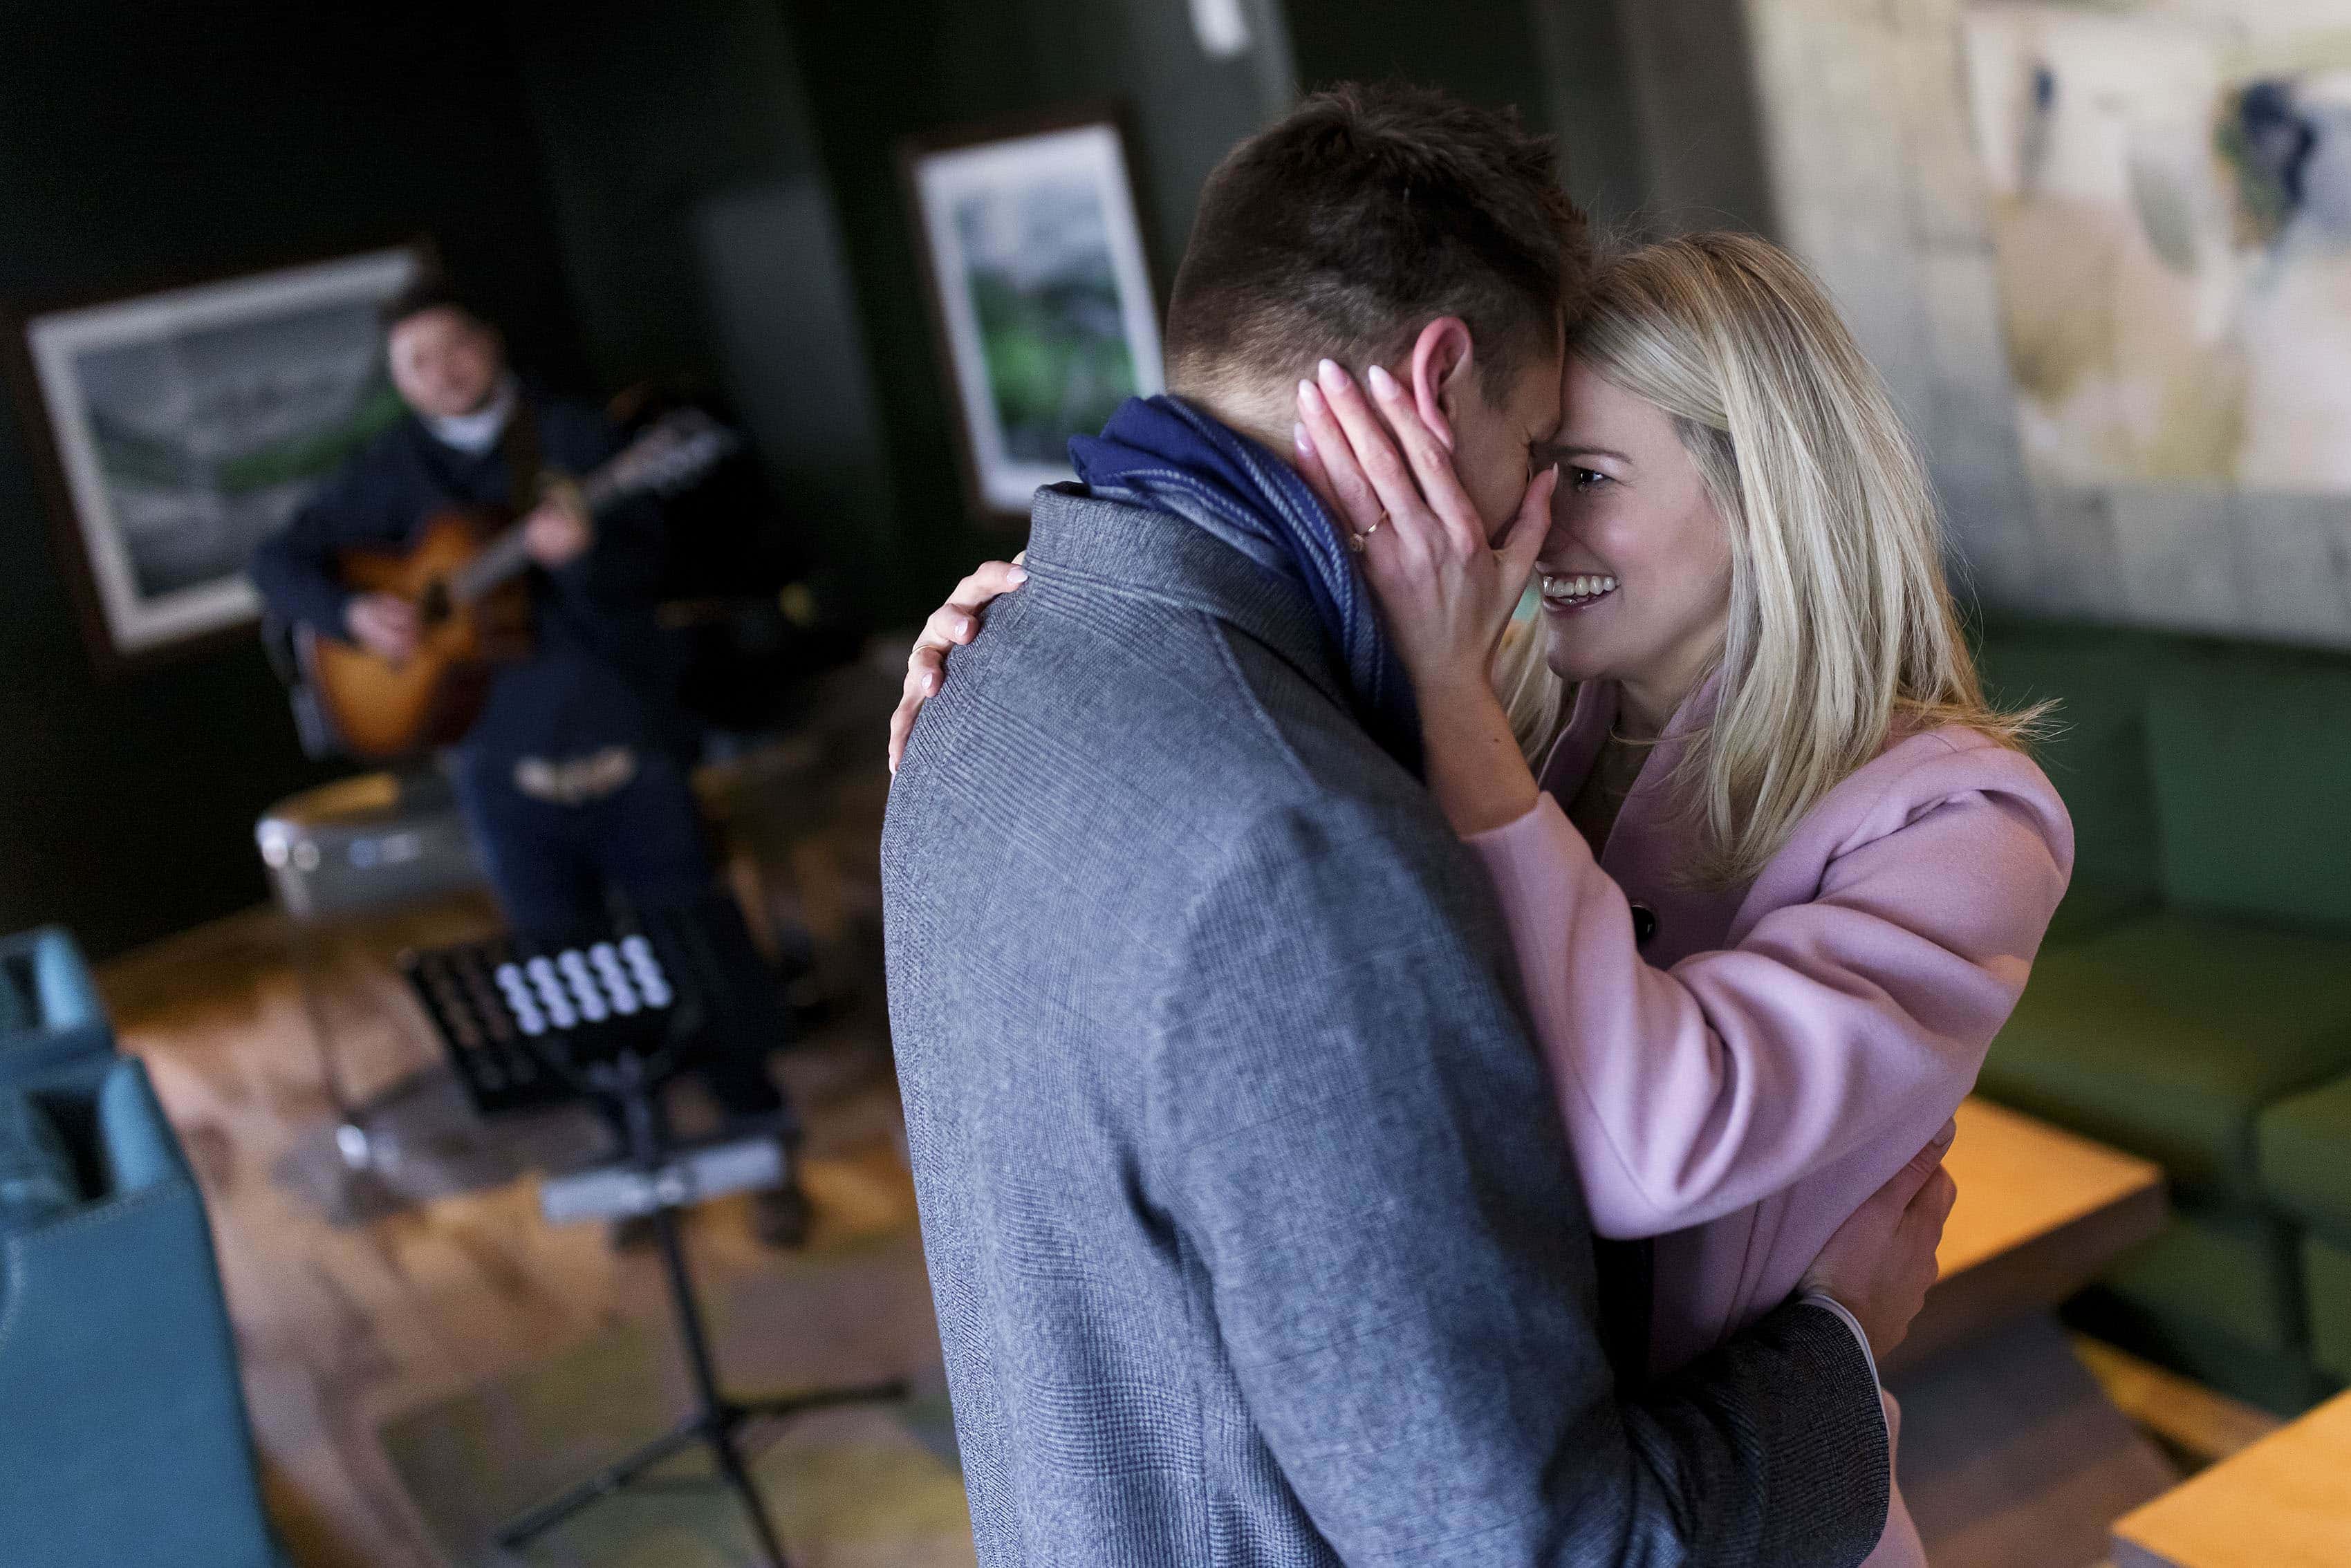 The couple dances together as an acoustic guitarist plays a song after the marriage proposal